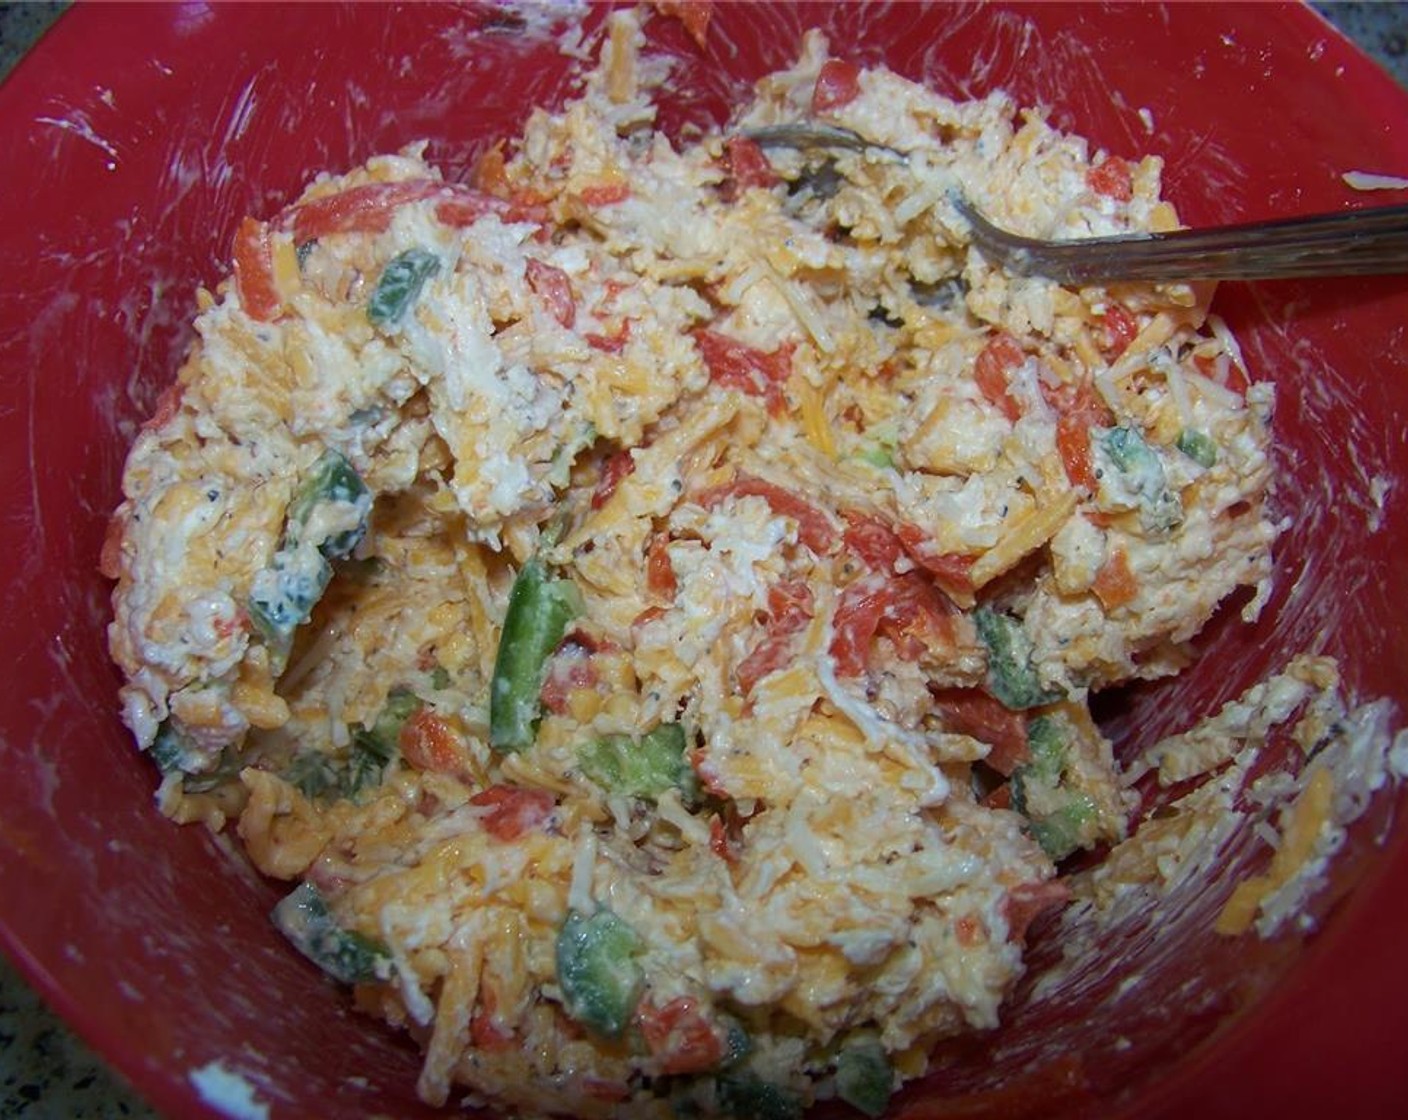 step 3 In a medium bowl, mix together the sharp cheddar cheese, Mozzarella Cheese (1/2 cup), Cream Cheese (1/3 cup), McCormick® Garlic Powder (1/2 tsp), Ground Black Pepper (1/2 tsp), Crushed Red Pepper Flakes (to taste), Jalapeño Pepper and Pimiento Peppers (2 Tbsp)